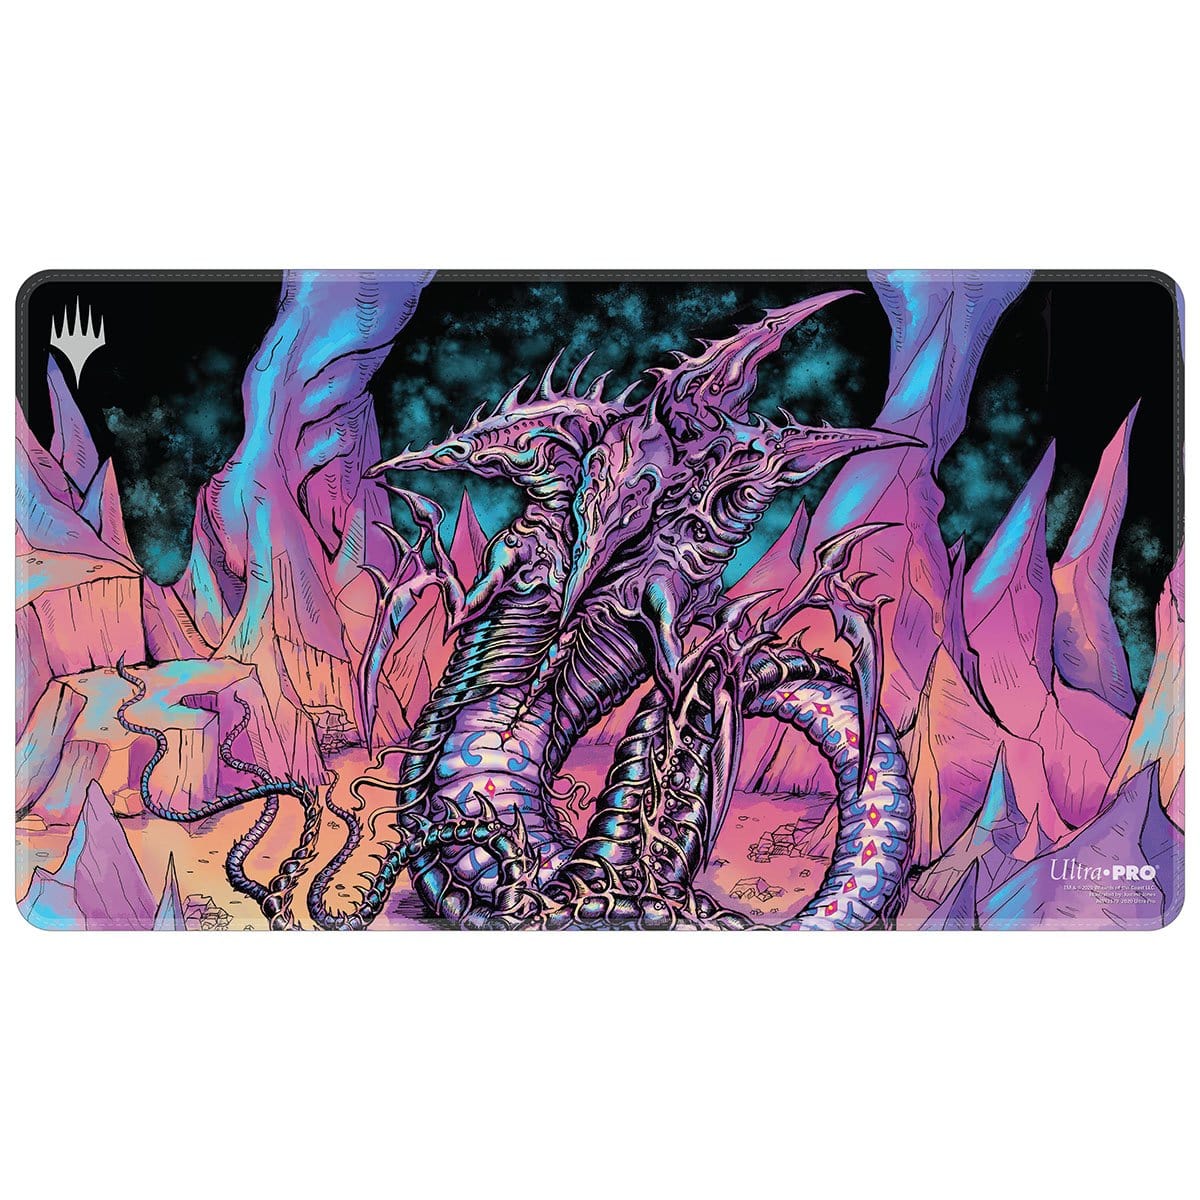 Sliver Overlord Playmat